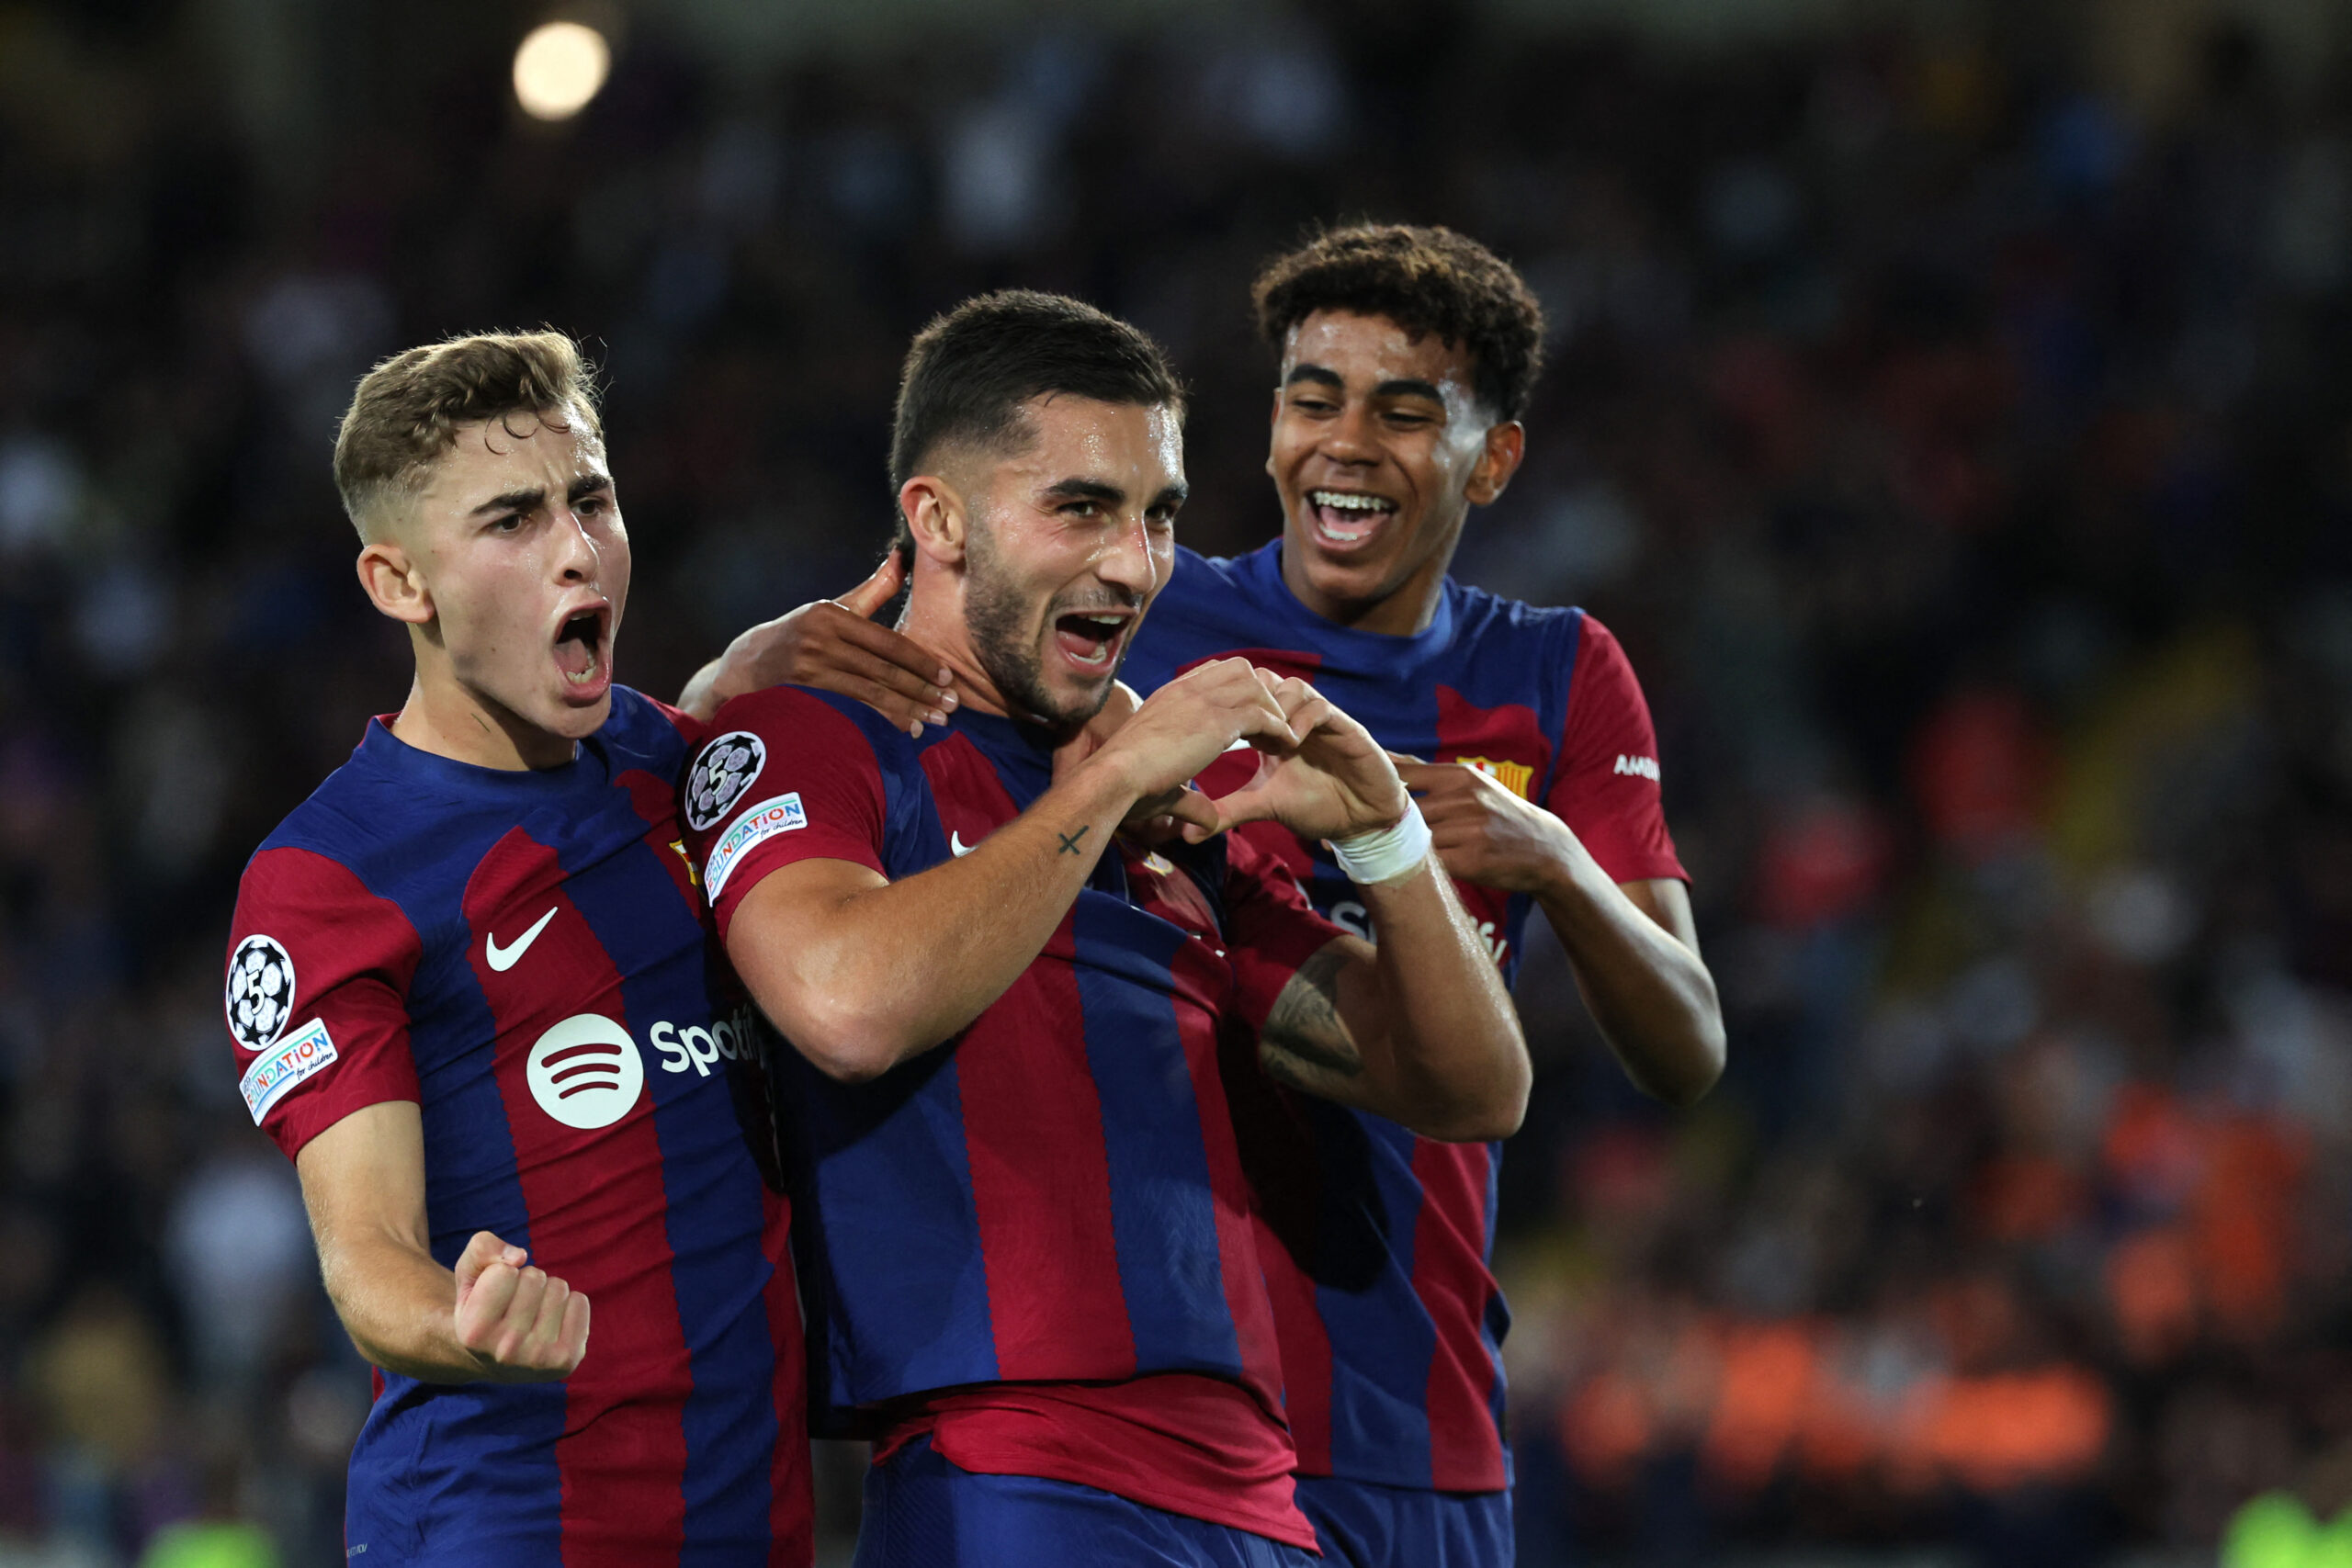 Barcelona's Spanish forward #07 Ferran Torres (C), flanked by Barcelona's Spanish midfielder #32 Fermin Lopez (L) and Barcelona's Spanish forward #27 Lamine Yamal, celebrates scoring the opening goal during the UEFA Champions League 1st round Group H football match between FC Barcelona and Shakhtar Donetsk at the Estadi Olimpic Lluis Companys in Barcelona on October 25, 2023.